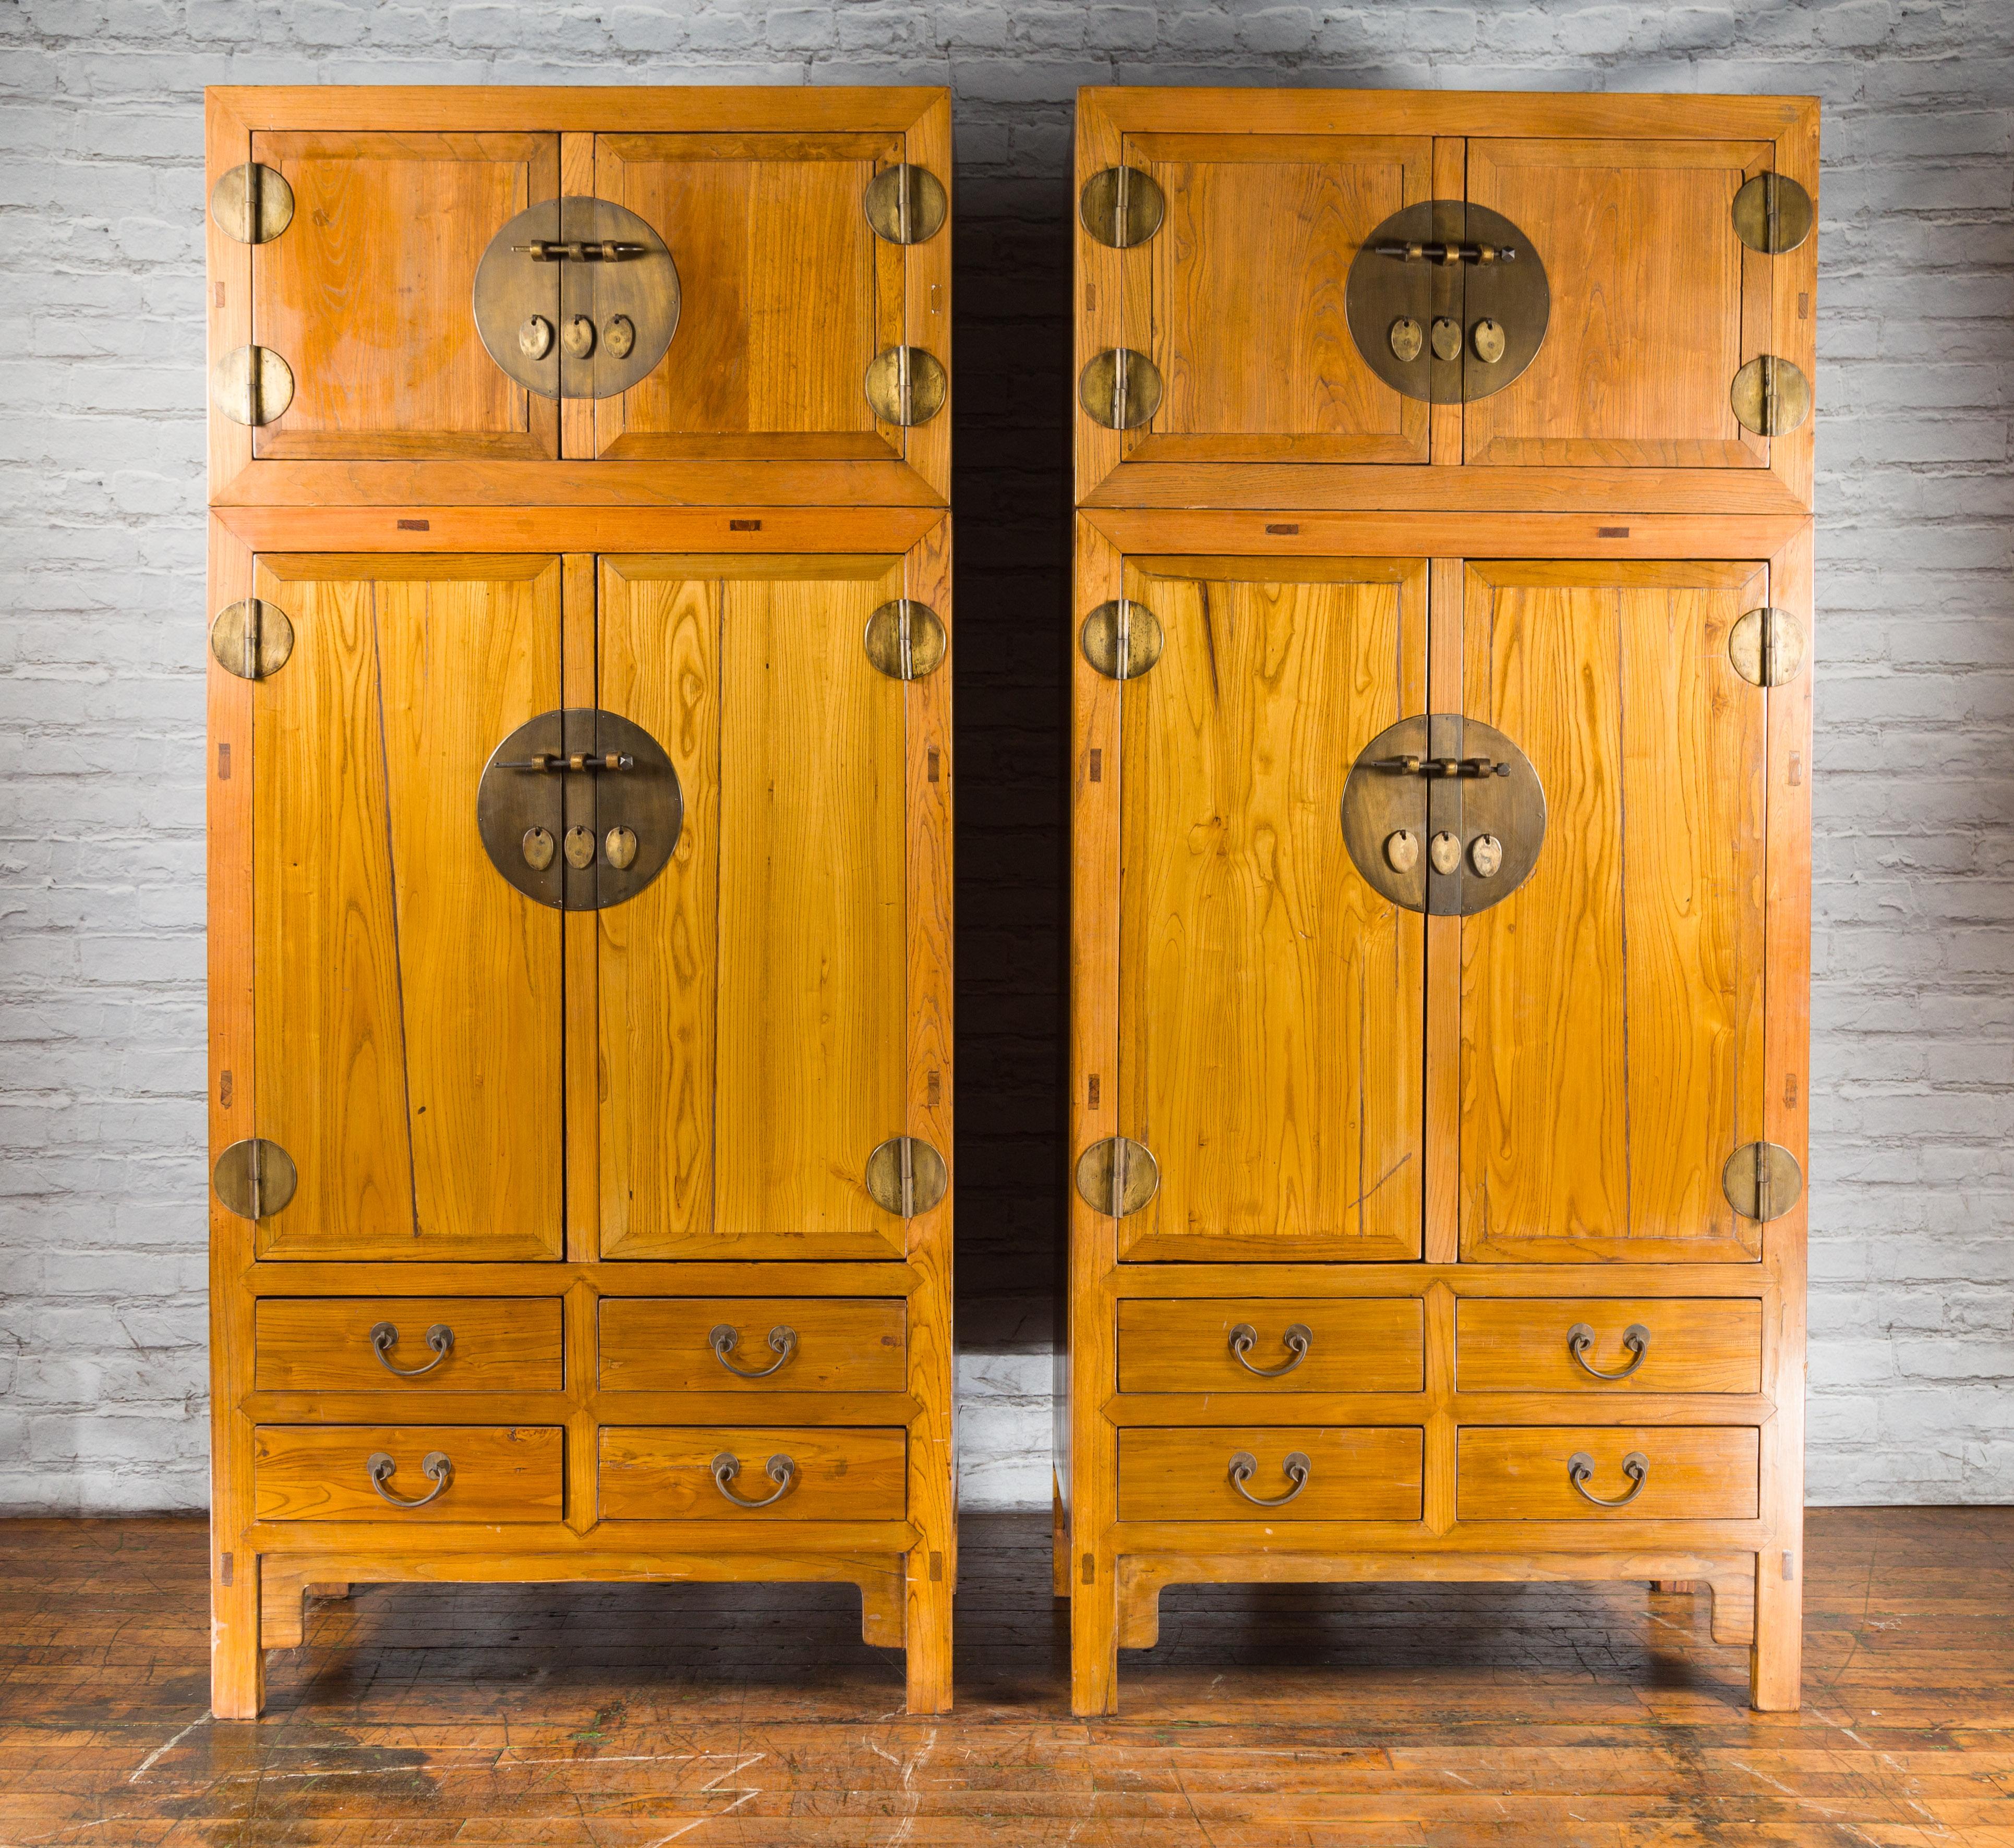 A pair of tall Chinese Qing Dynasty period compound cabinets from the 19th century made of elm wood and adorned with brass hardware. Created in China during the Qing Dynasty period in the 19th century, each of this pair of large compound wardrobes